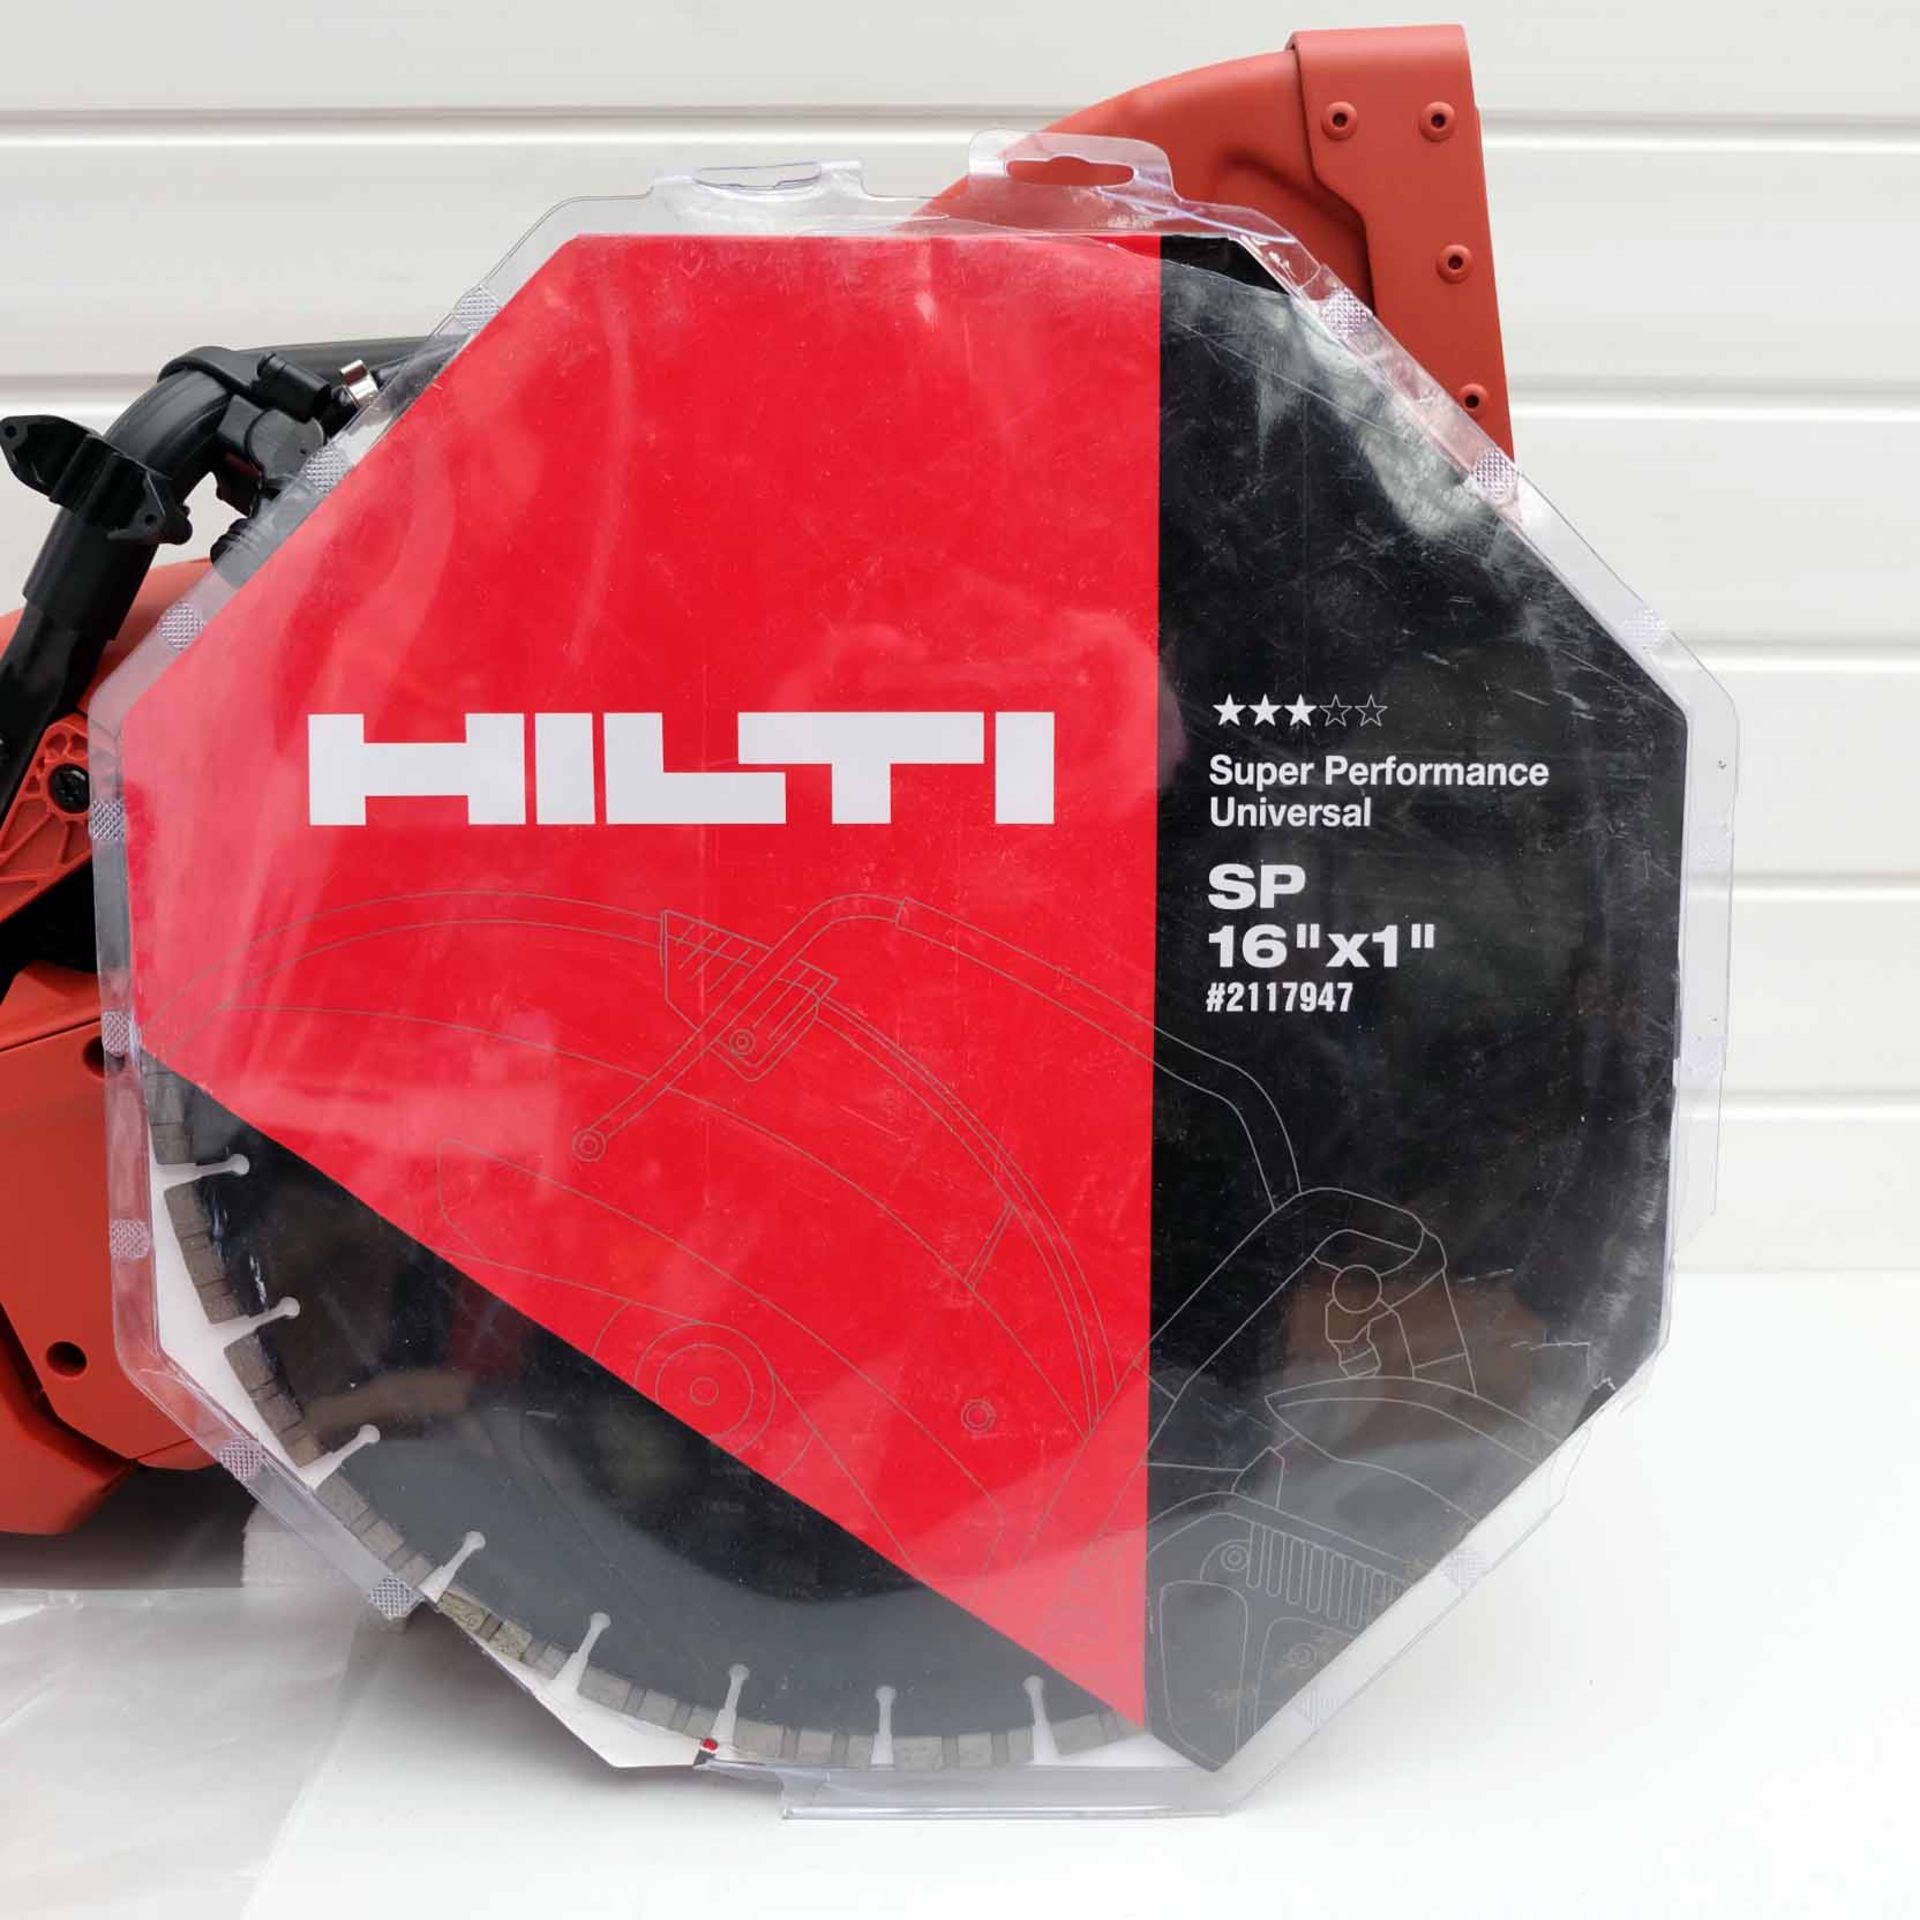 Hilti Hand Held Gas Saw. Model DSH 900-X 16". Complete With SP-16"x1" Blade. Easy Start Auto-Choke S - Image 16 of 25